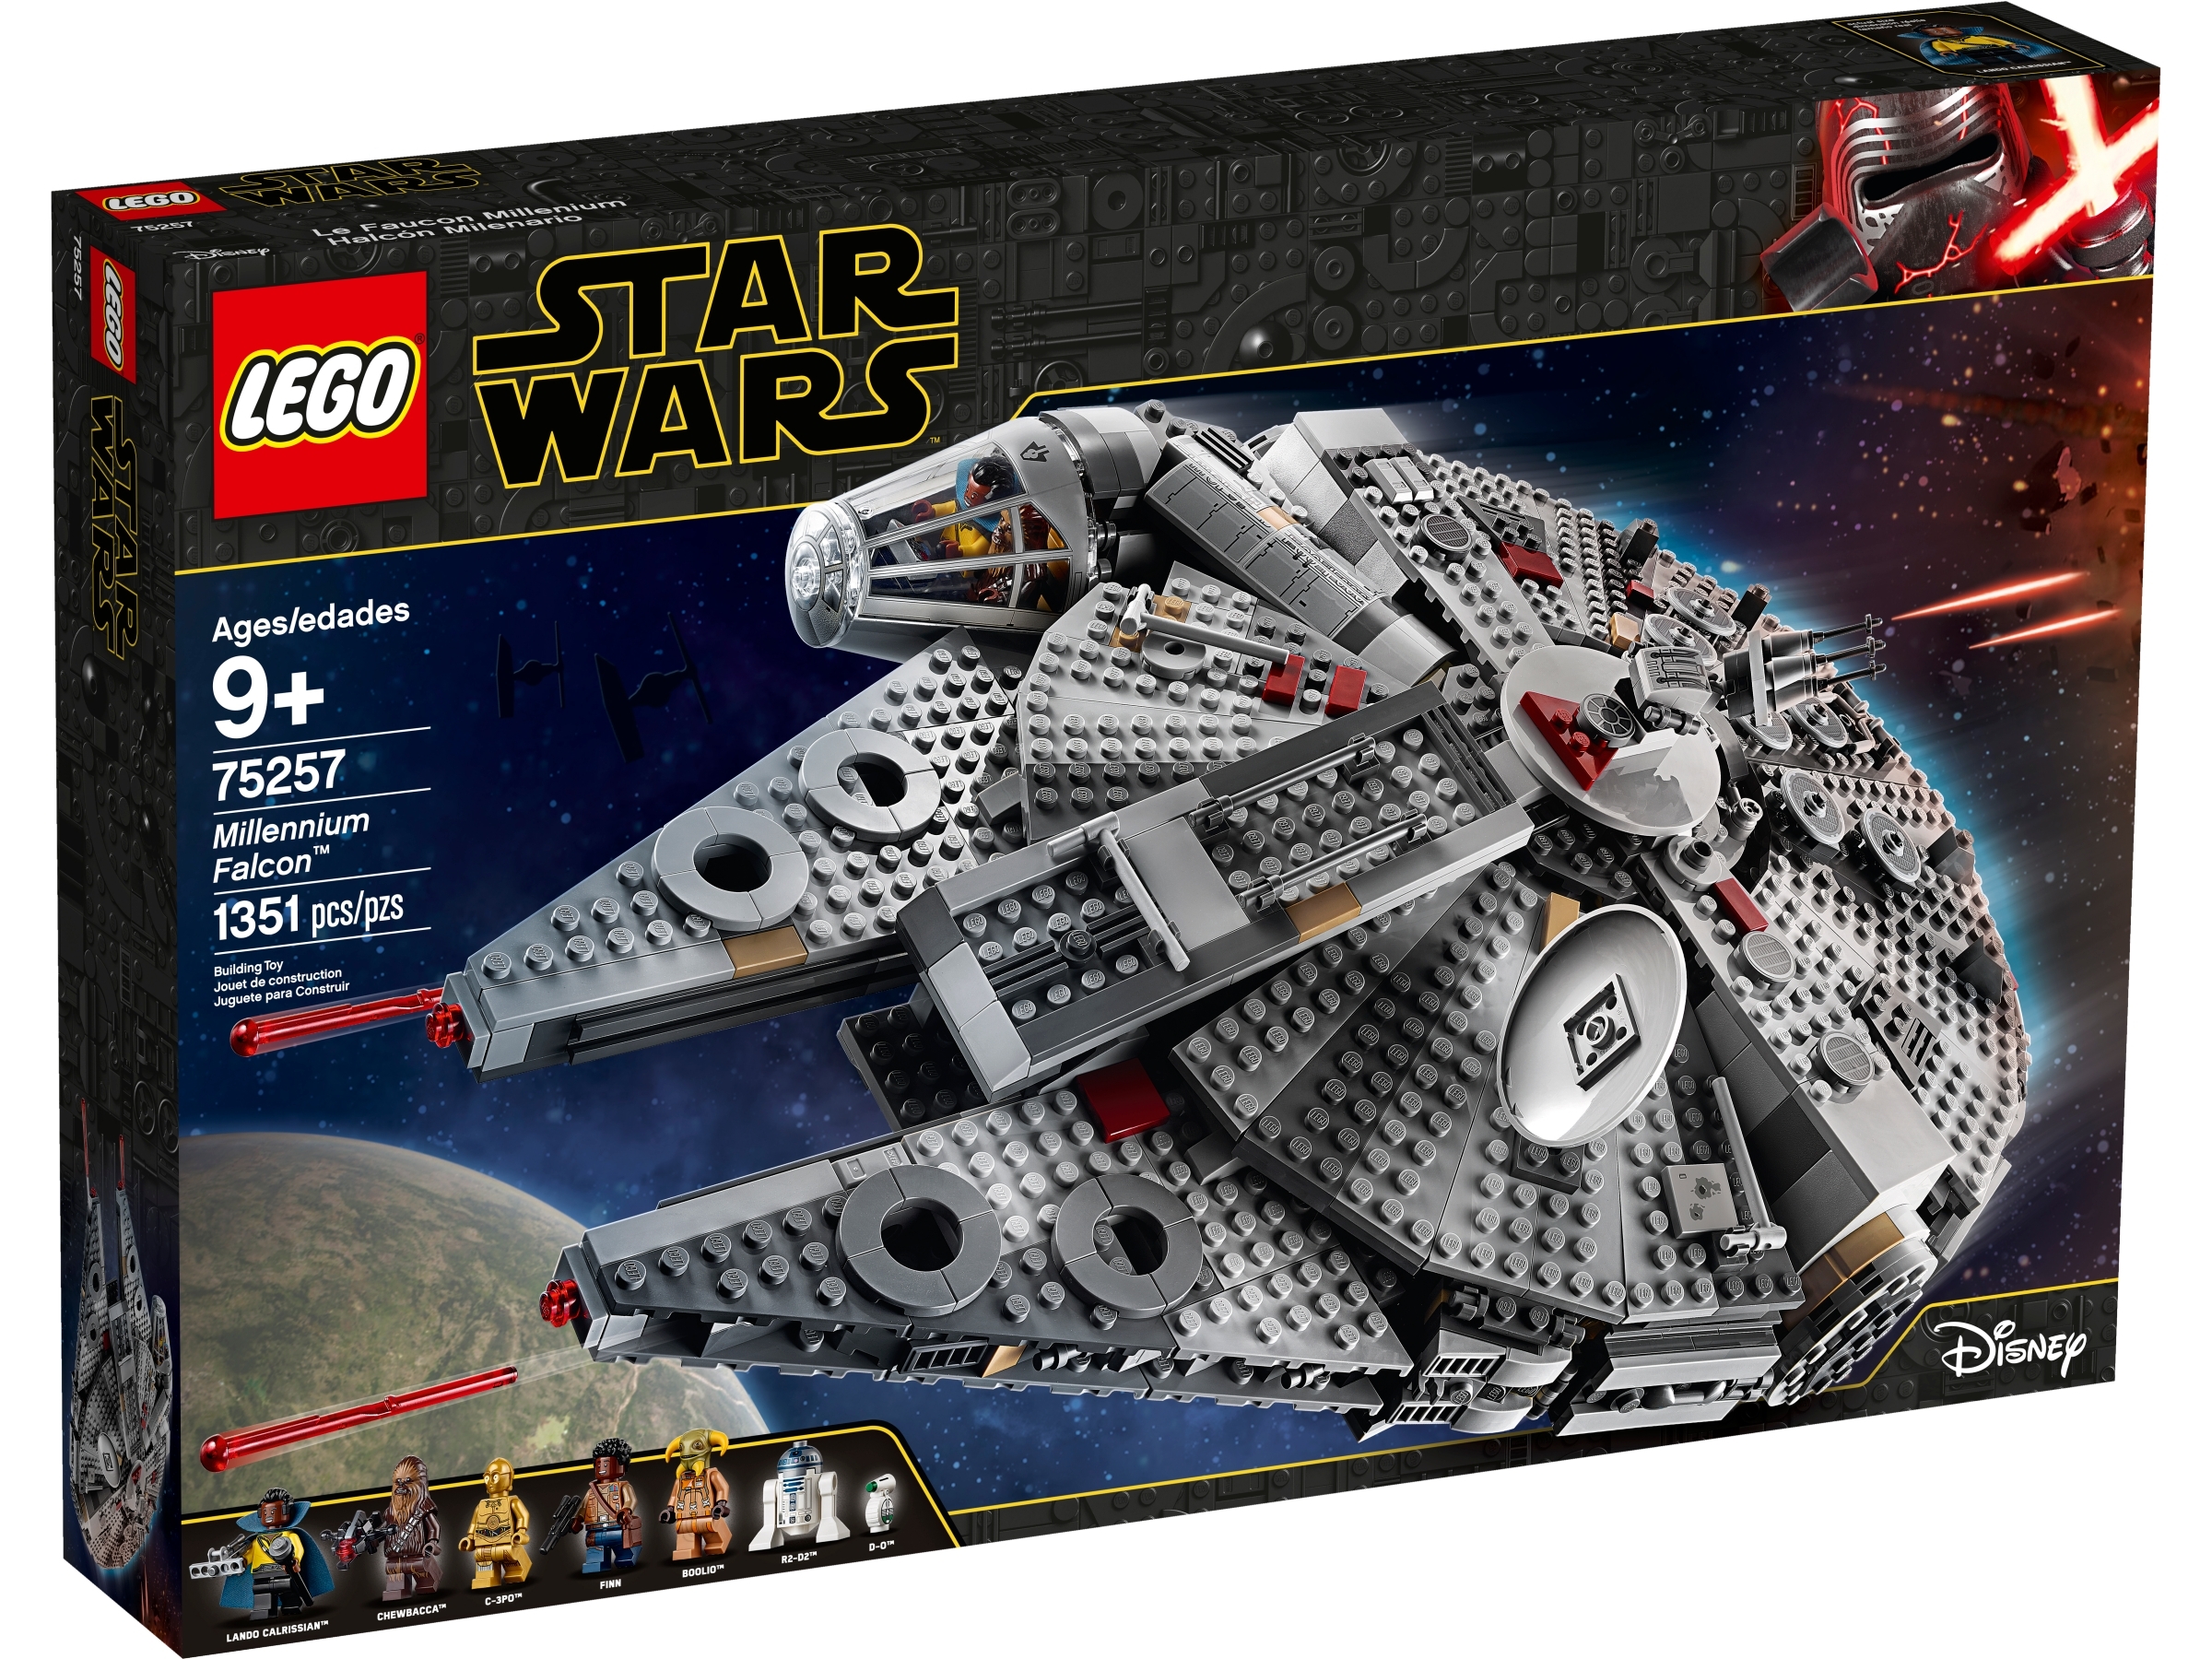 LEGO 75257 STAR WARS Millennium Falcon 75257 The rise of Skywalker for Christmas 